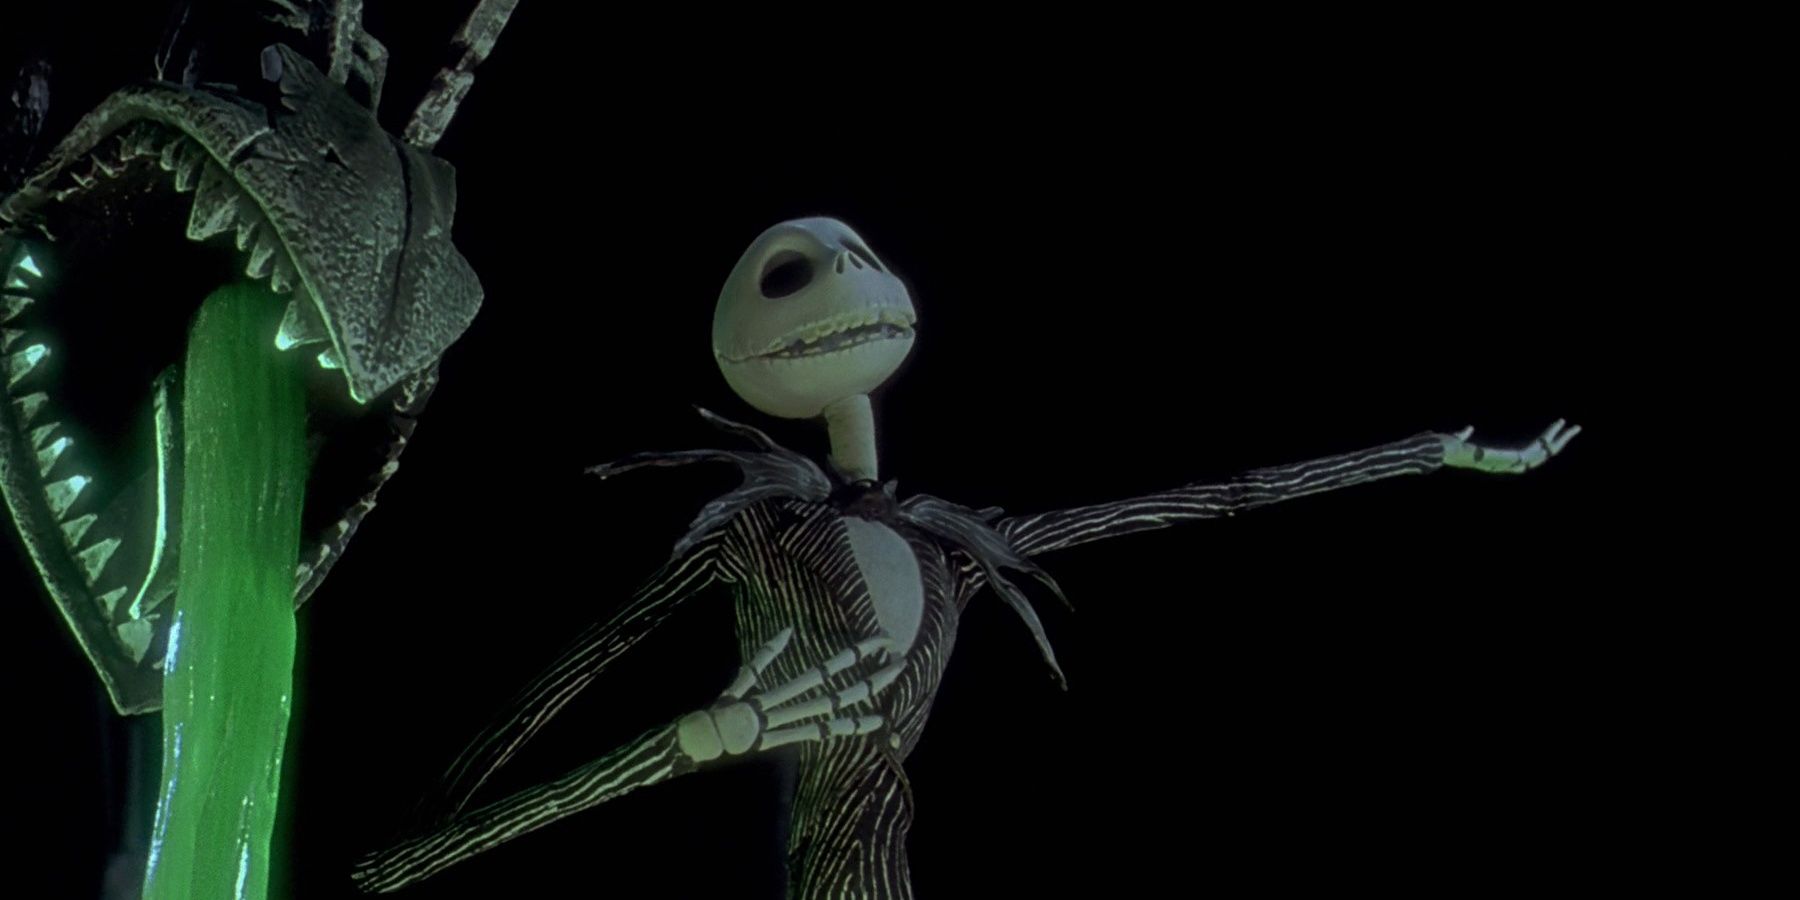 Nightmare Before Christmas' Cool Fun Facts You Didn't Know